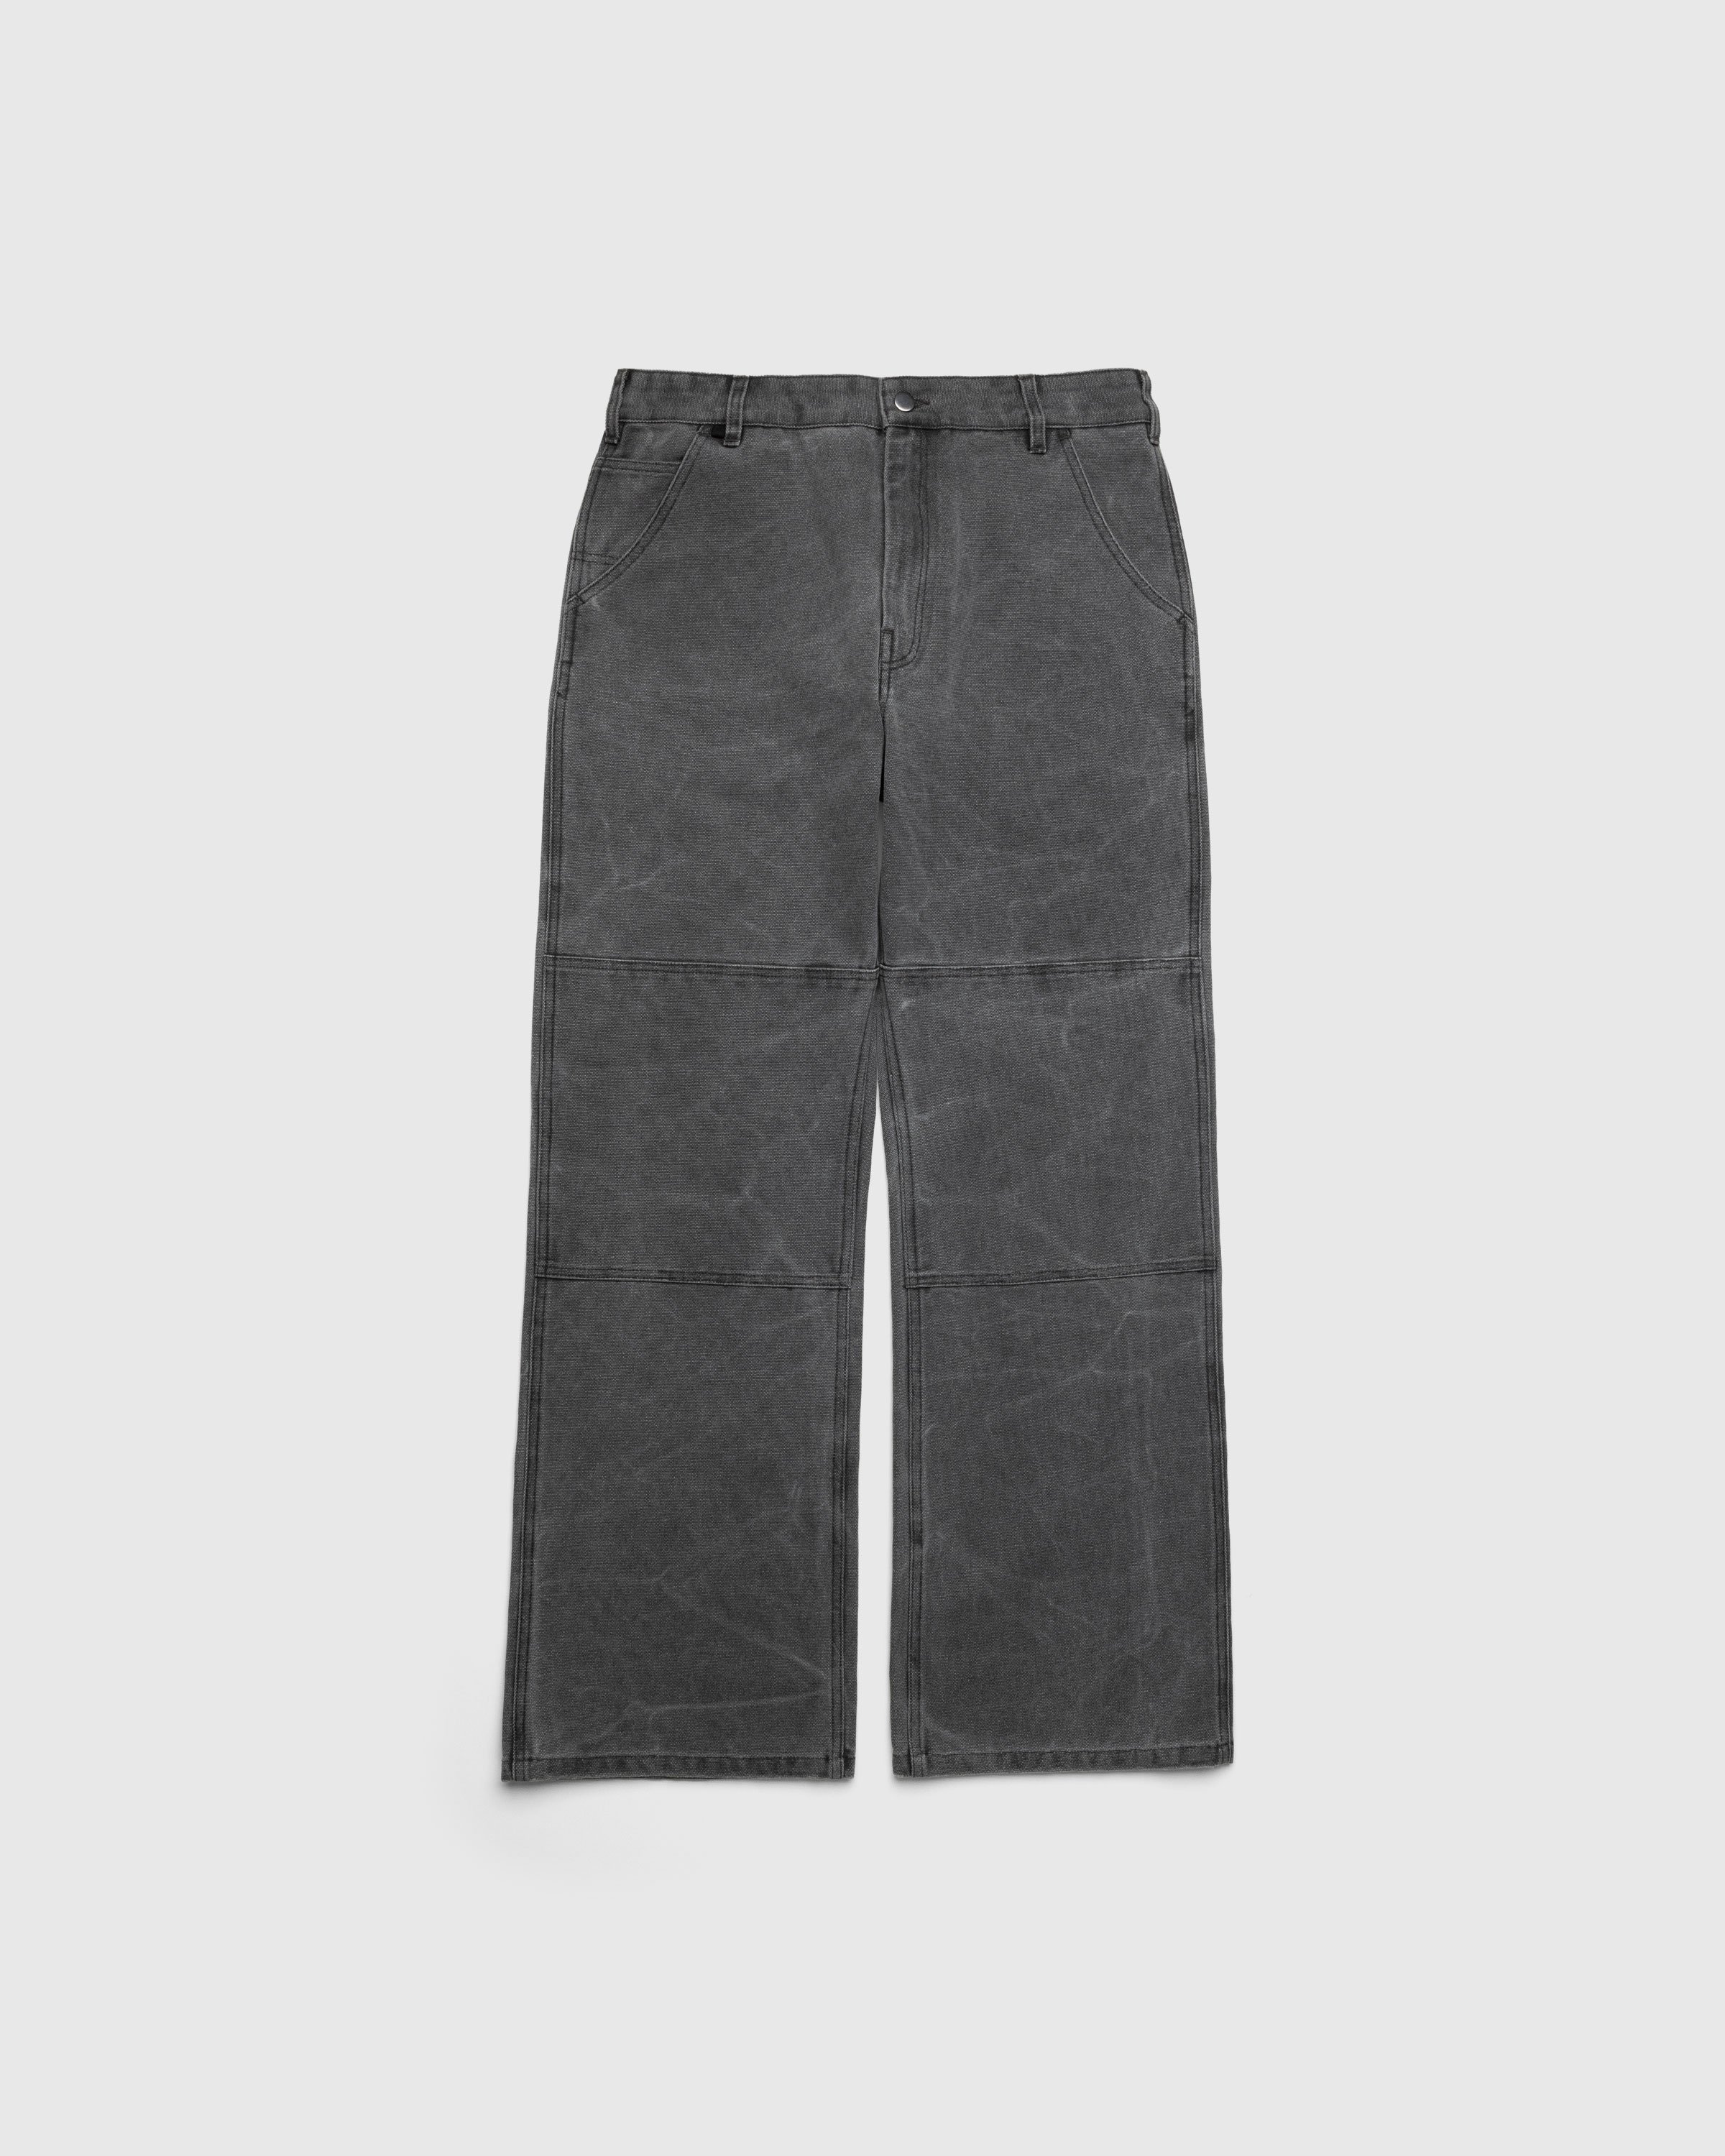 Acne Studios - Cotton Canvas Trousers Grey - Clothing - Grey - Image 1